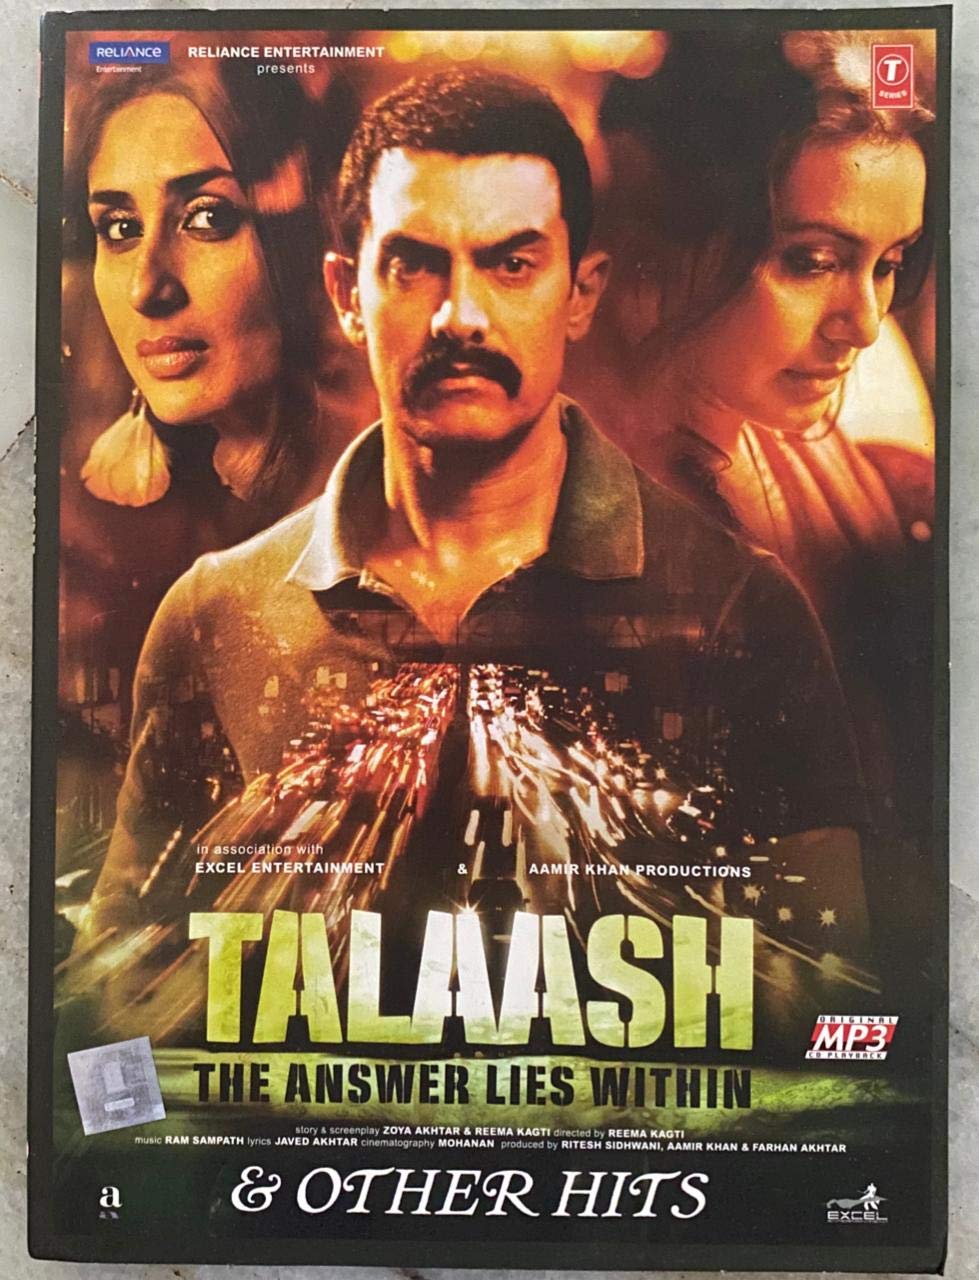 Buy Talaash & Other Hits Online at Low Prices in India. Amazon Music Store